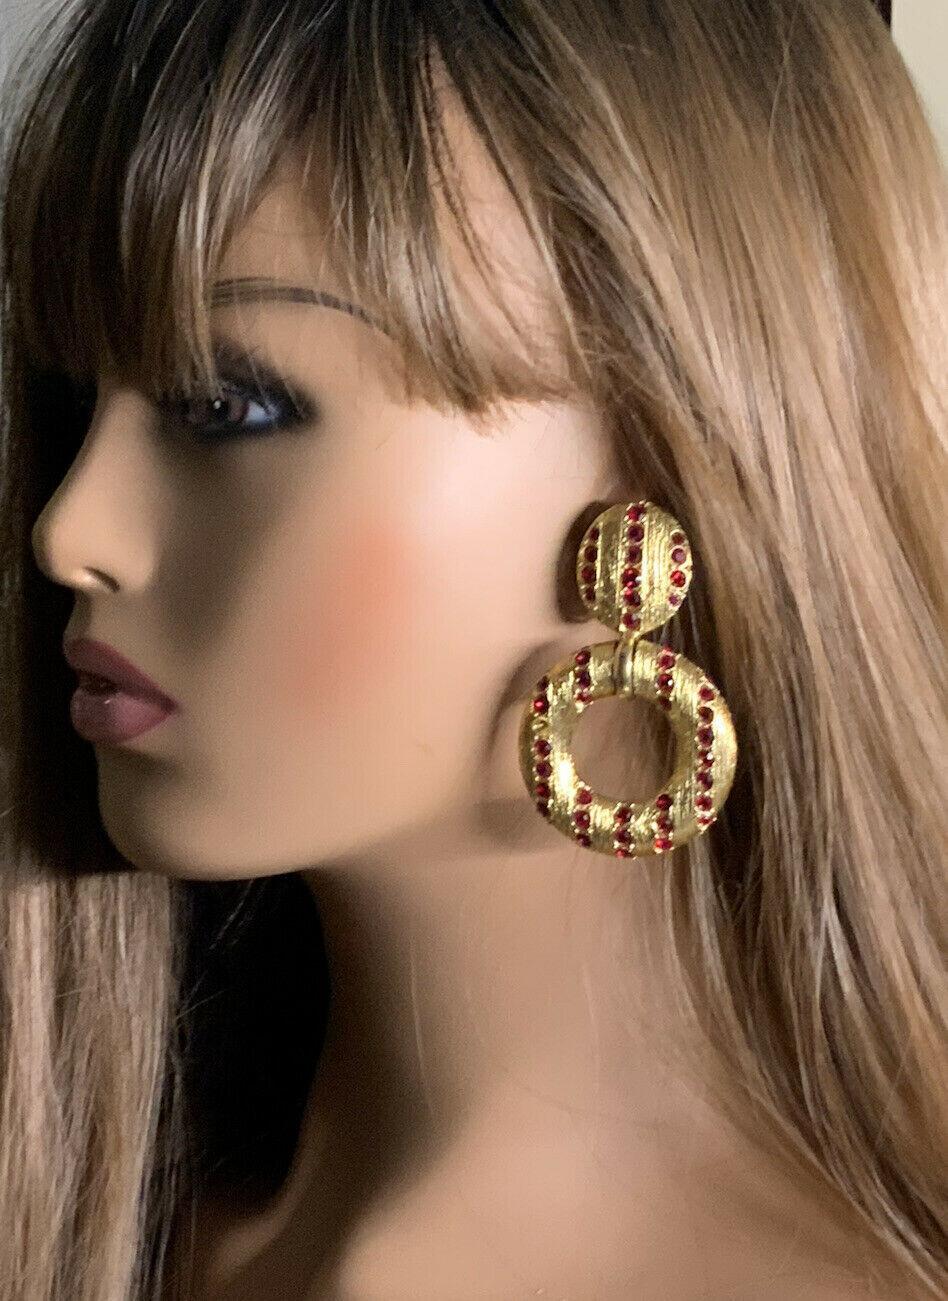 YVES SAINT LAURENT VINTAGE earrings in brass and red crystals with clips circa YSL 1980.
